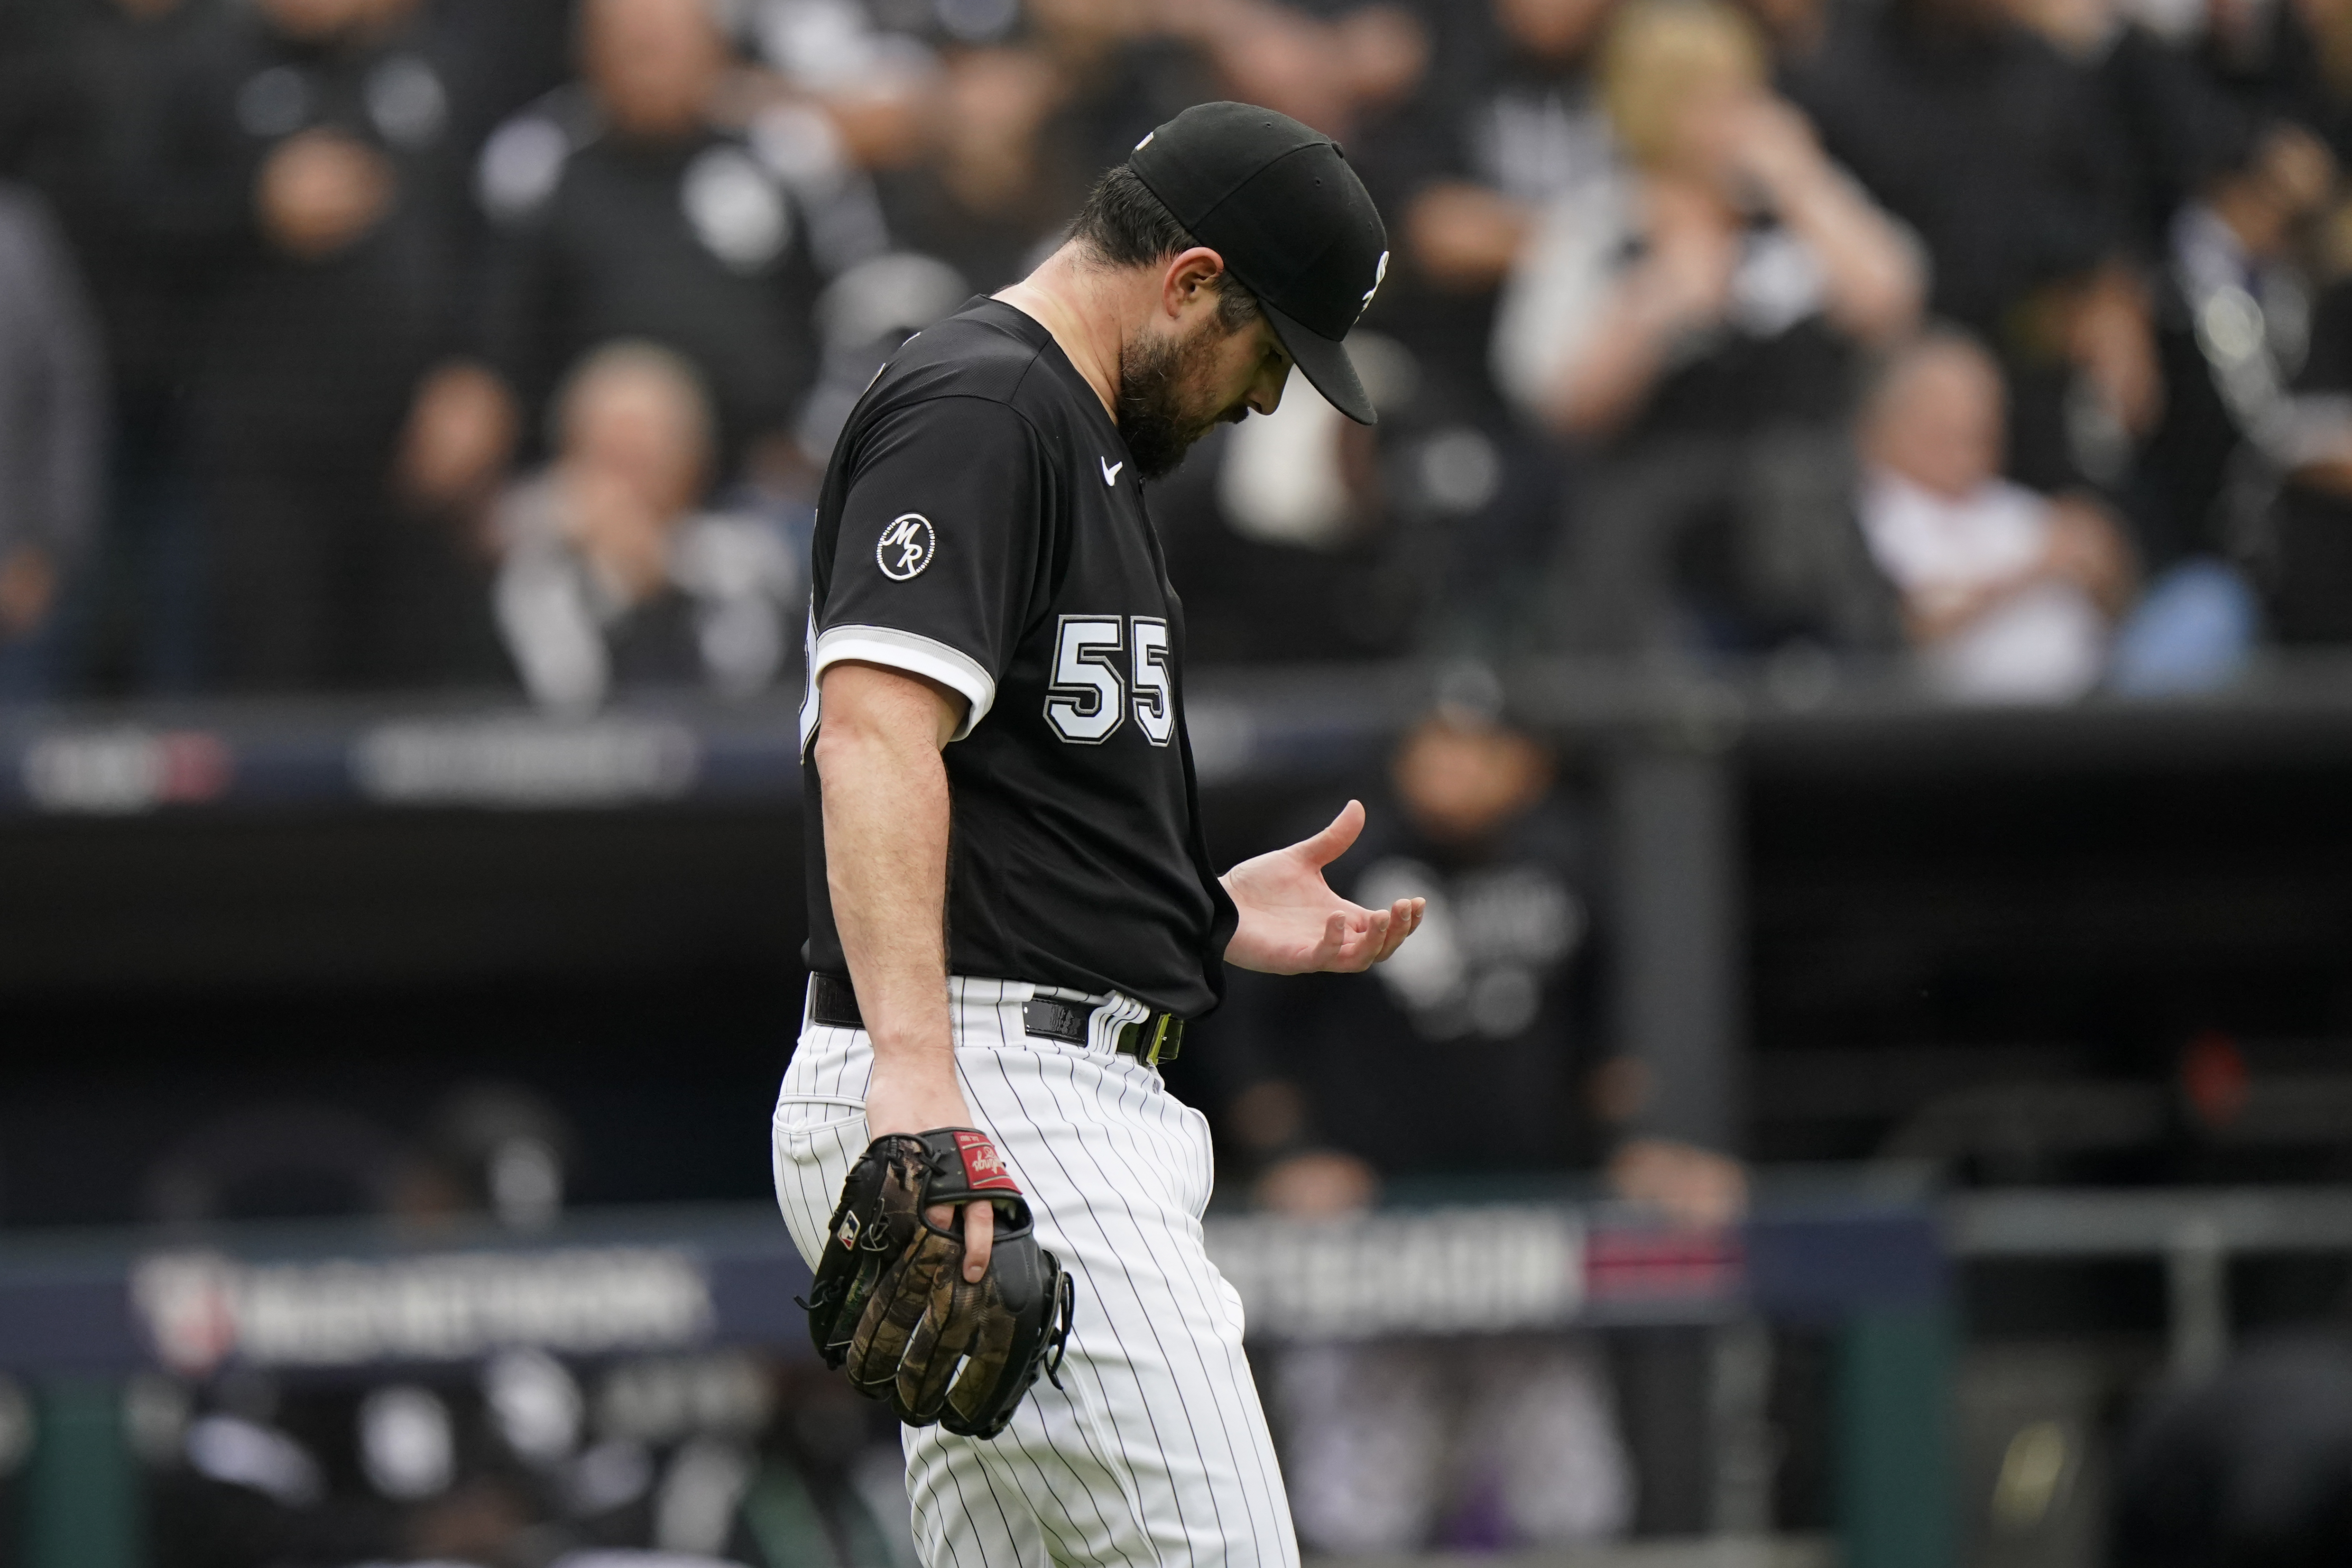 White Sox's Ryan Tepera implies Astros may have been stealing signs